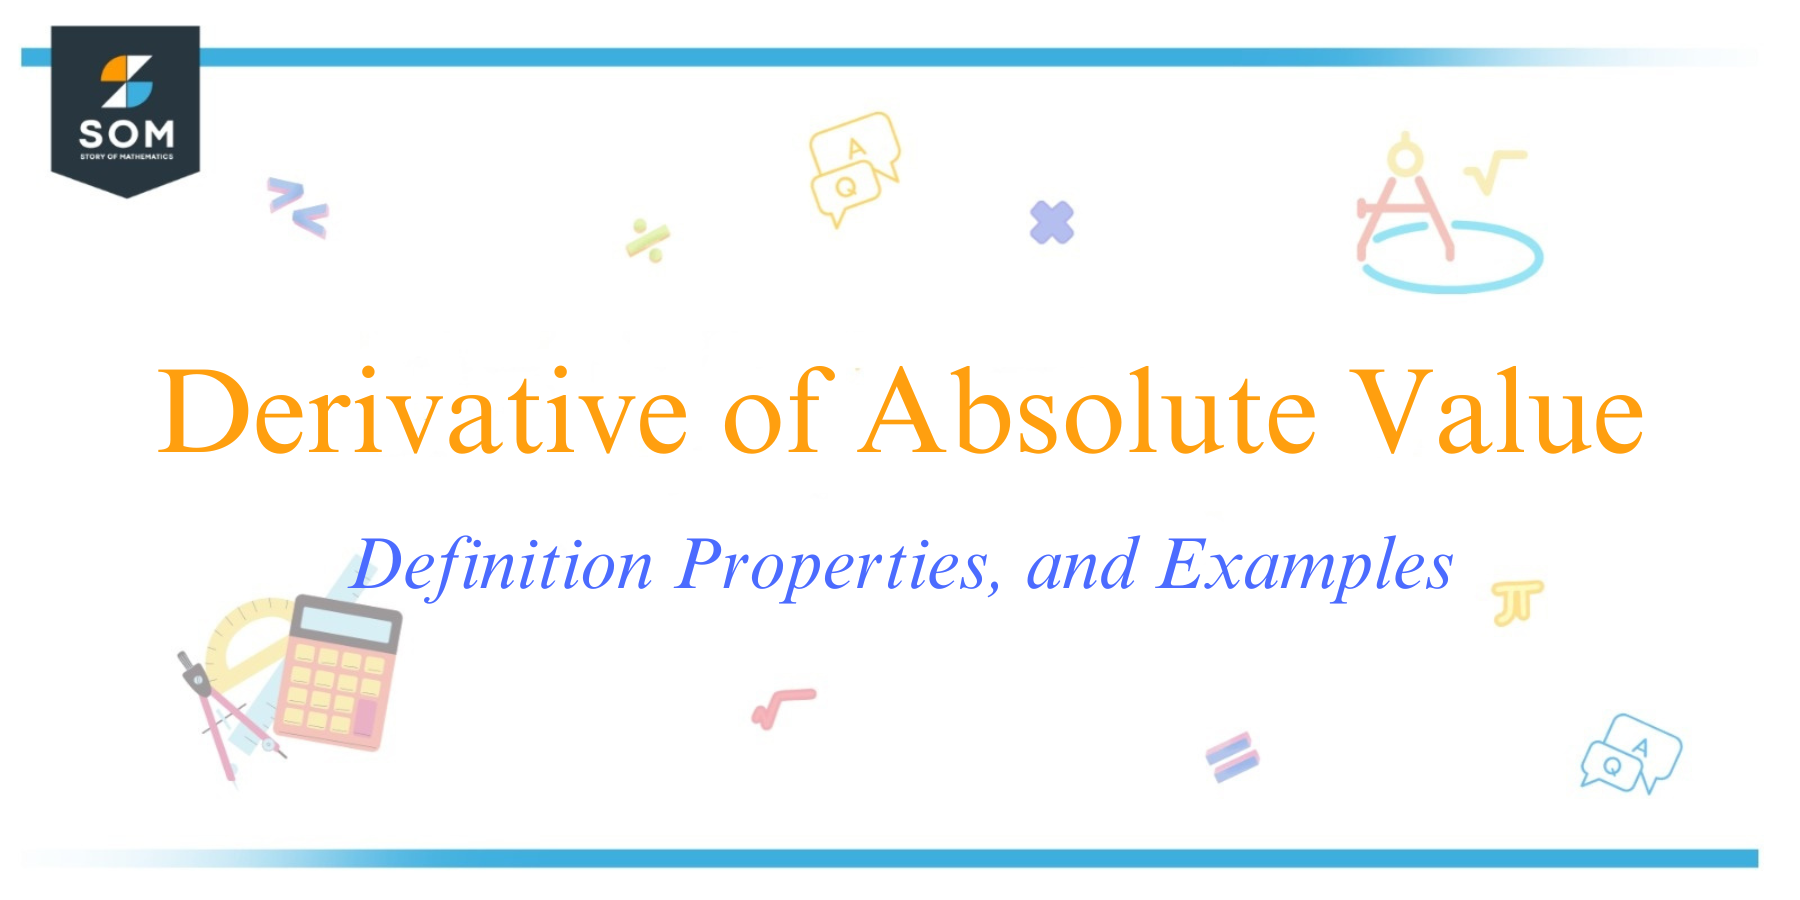 Derivative of Absolute Value Definition Properties and